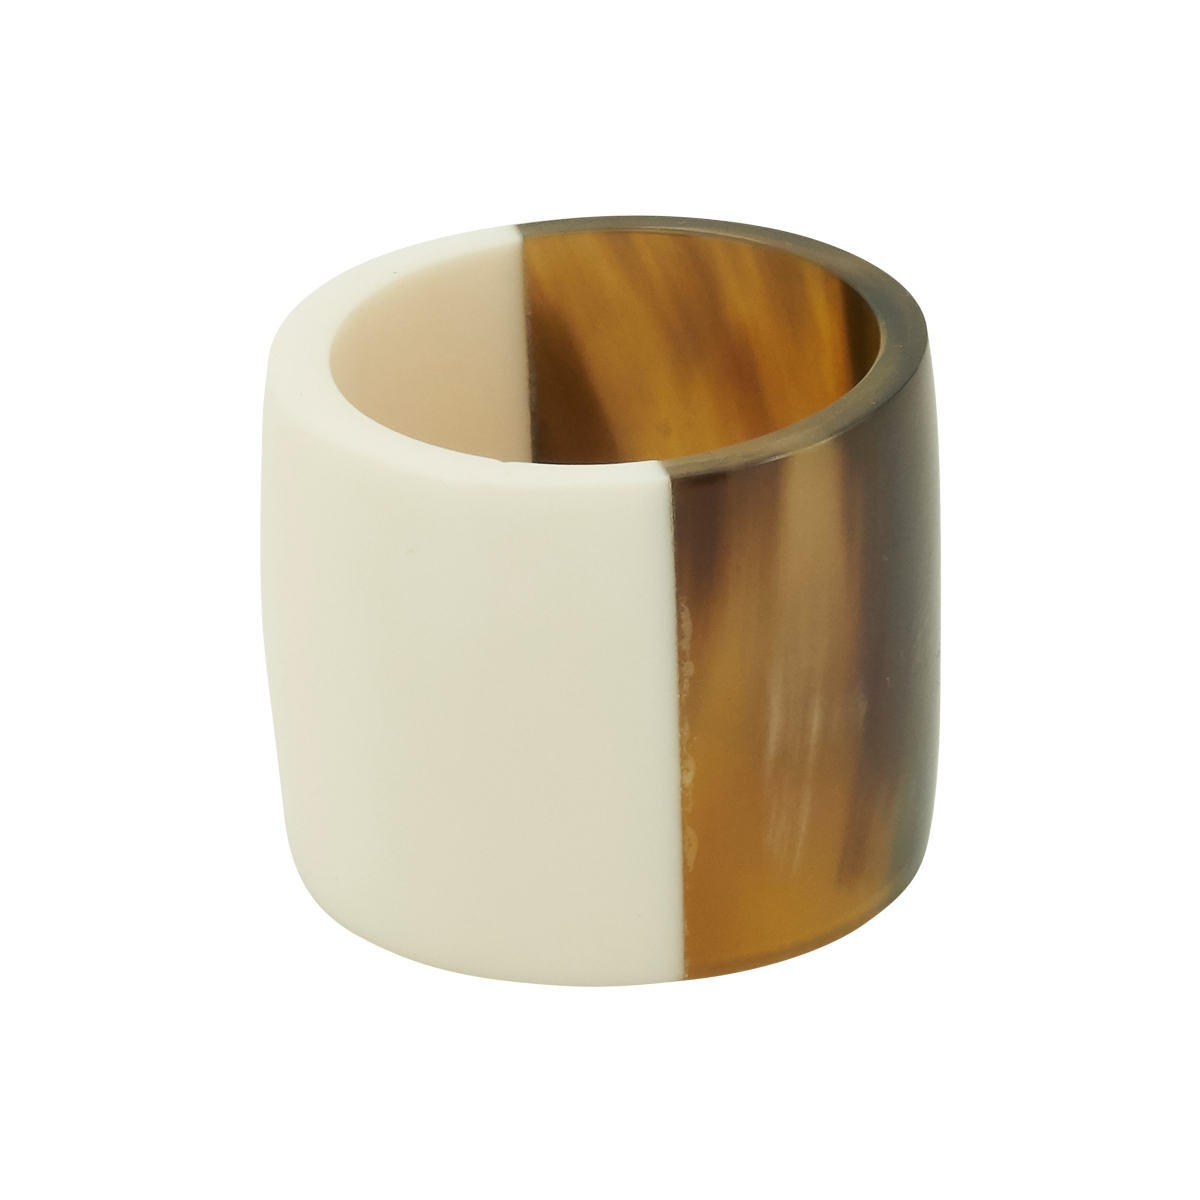 1.5 x 1.5 in. Elongated Horn - Bone Napkin Rings, Brown - Set of 4 -  CookHouse, CO3202257